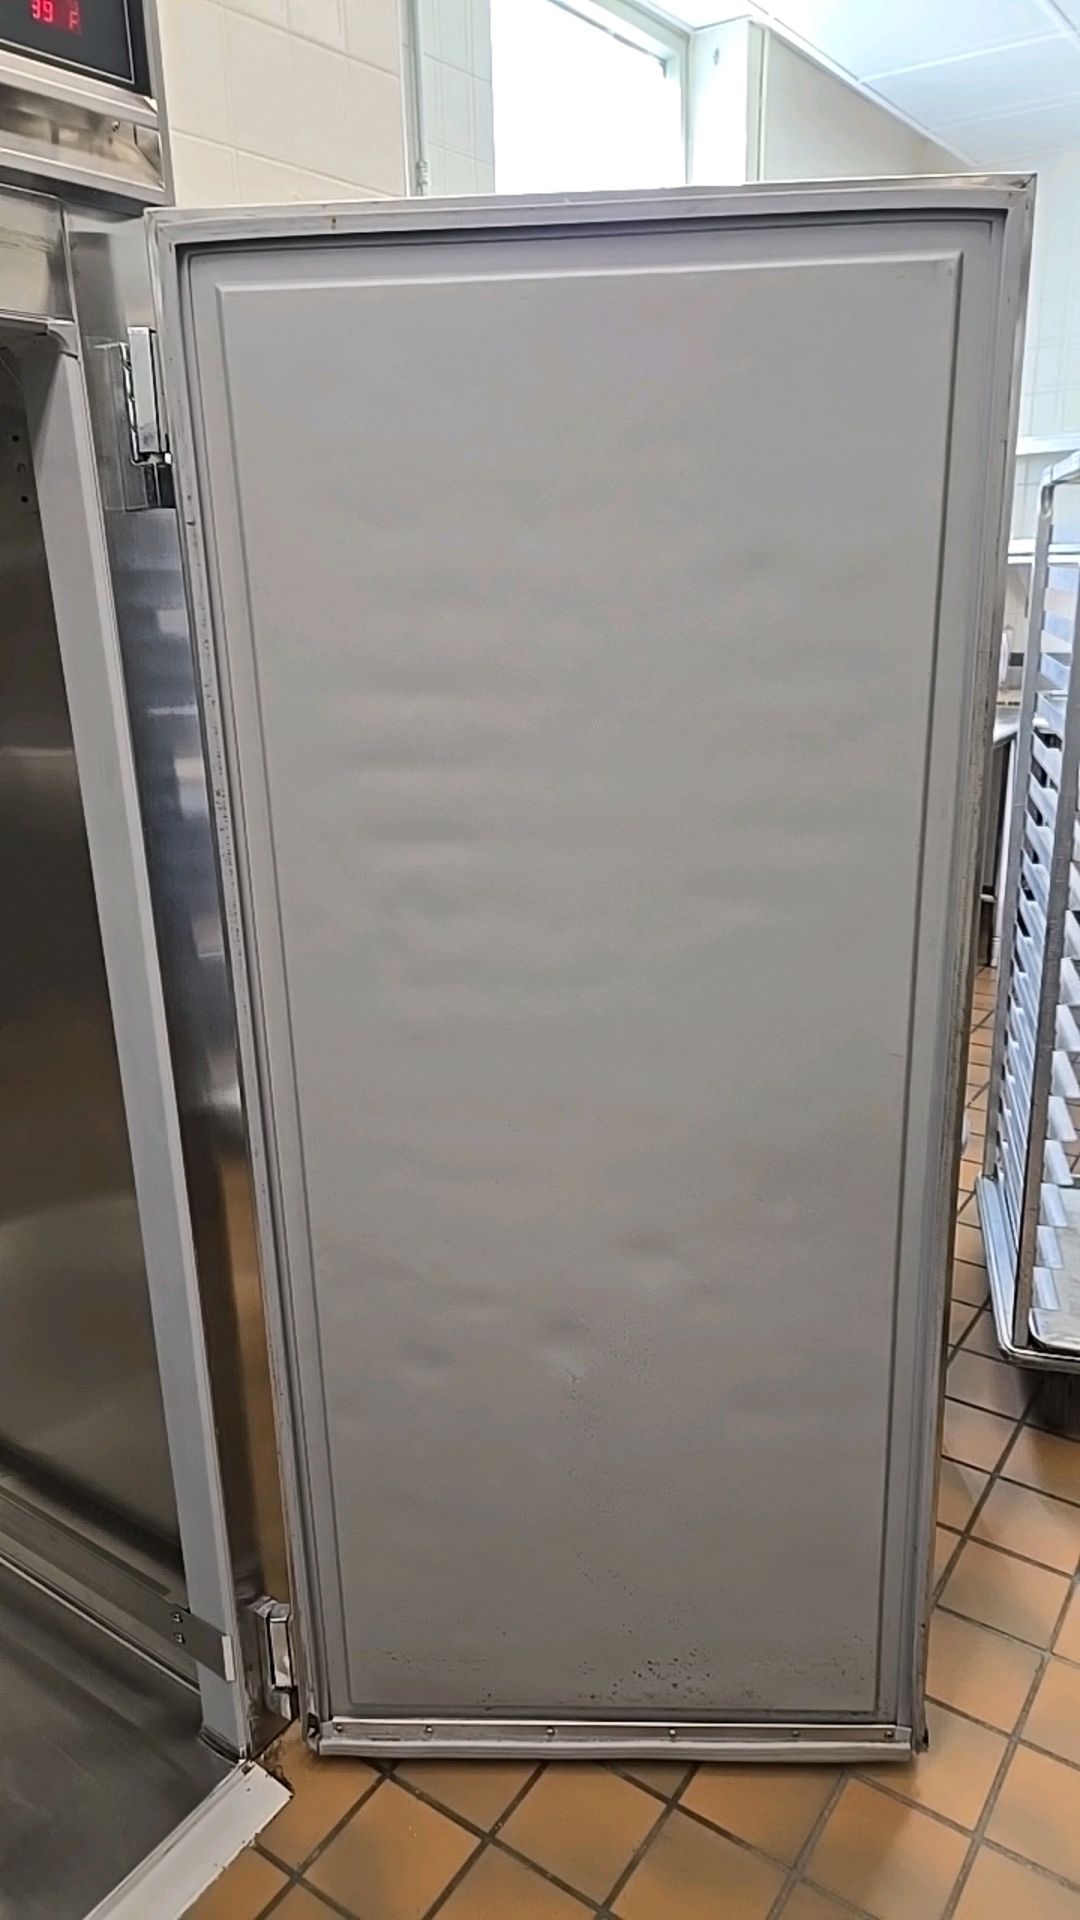 VICTORY RIS-2D-S7 ONE-SECTION, TWO-DOOR REFRIGERATOR - Image 5 of 7